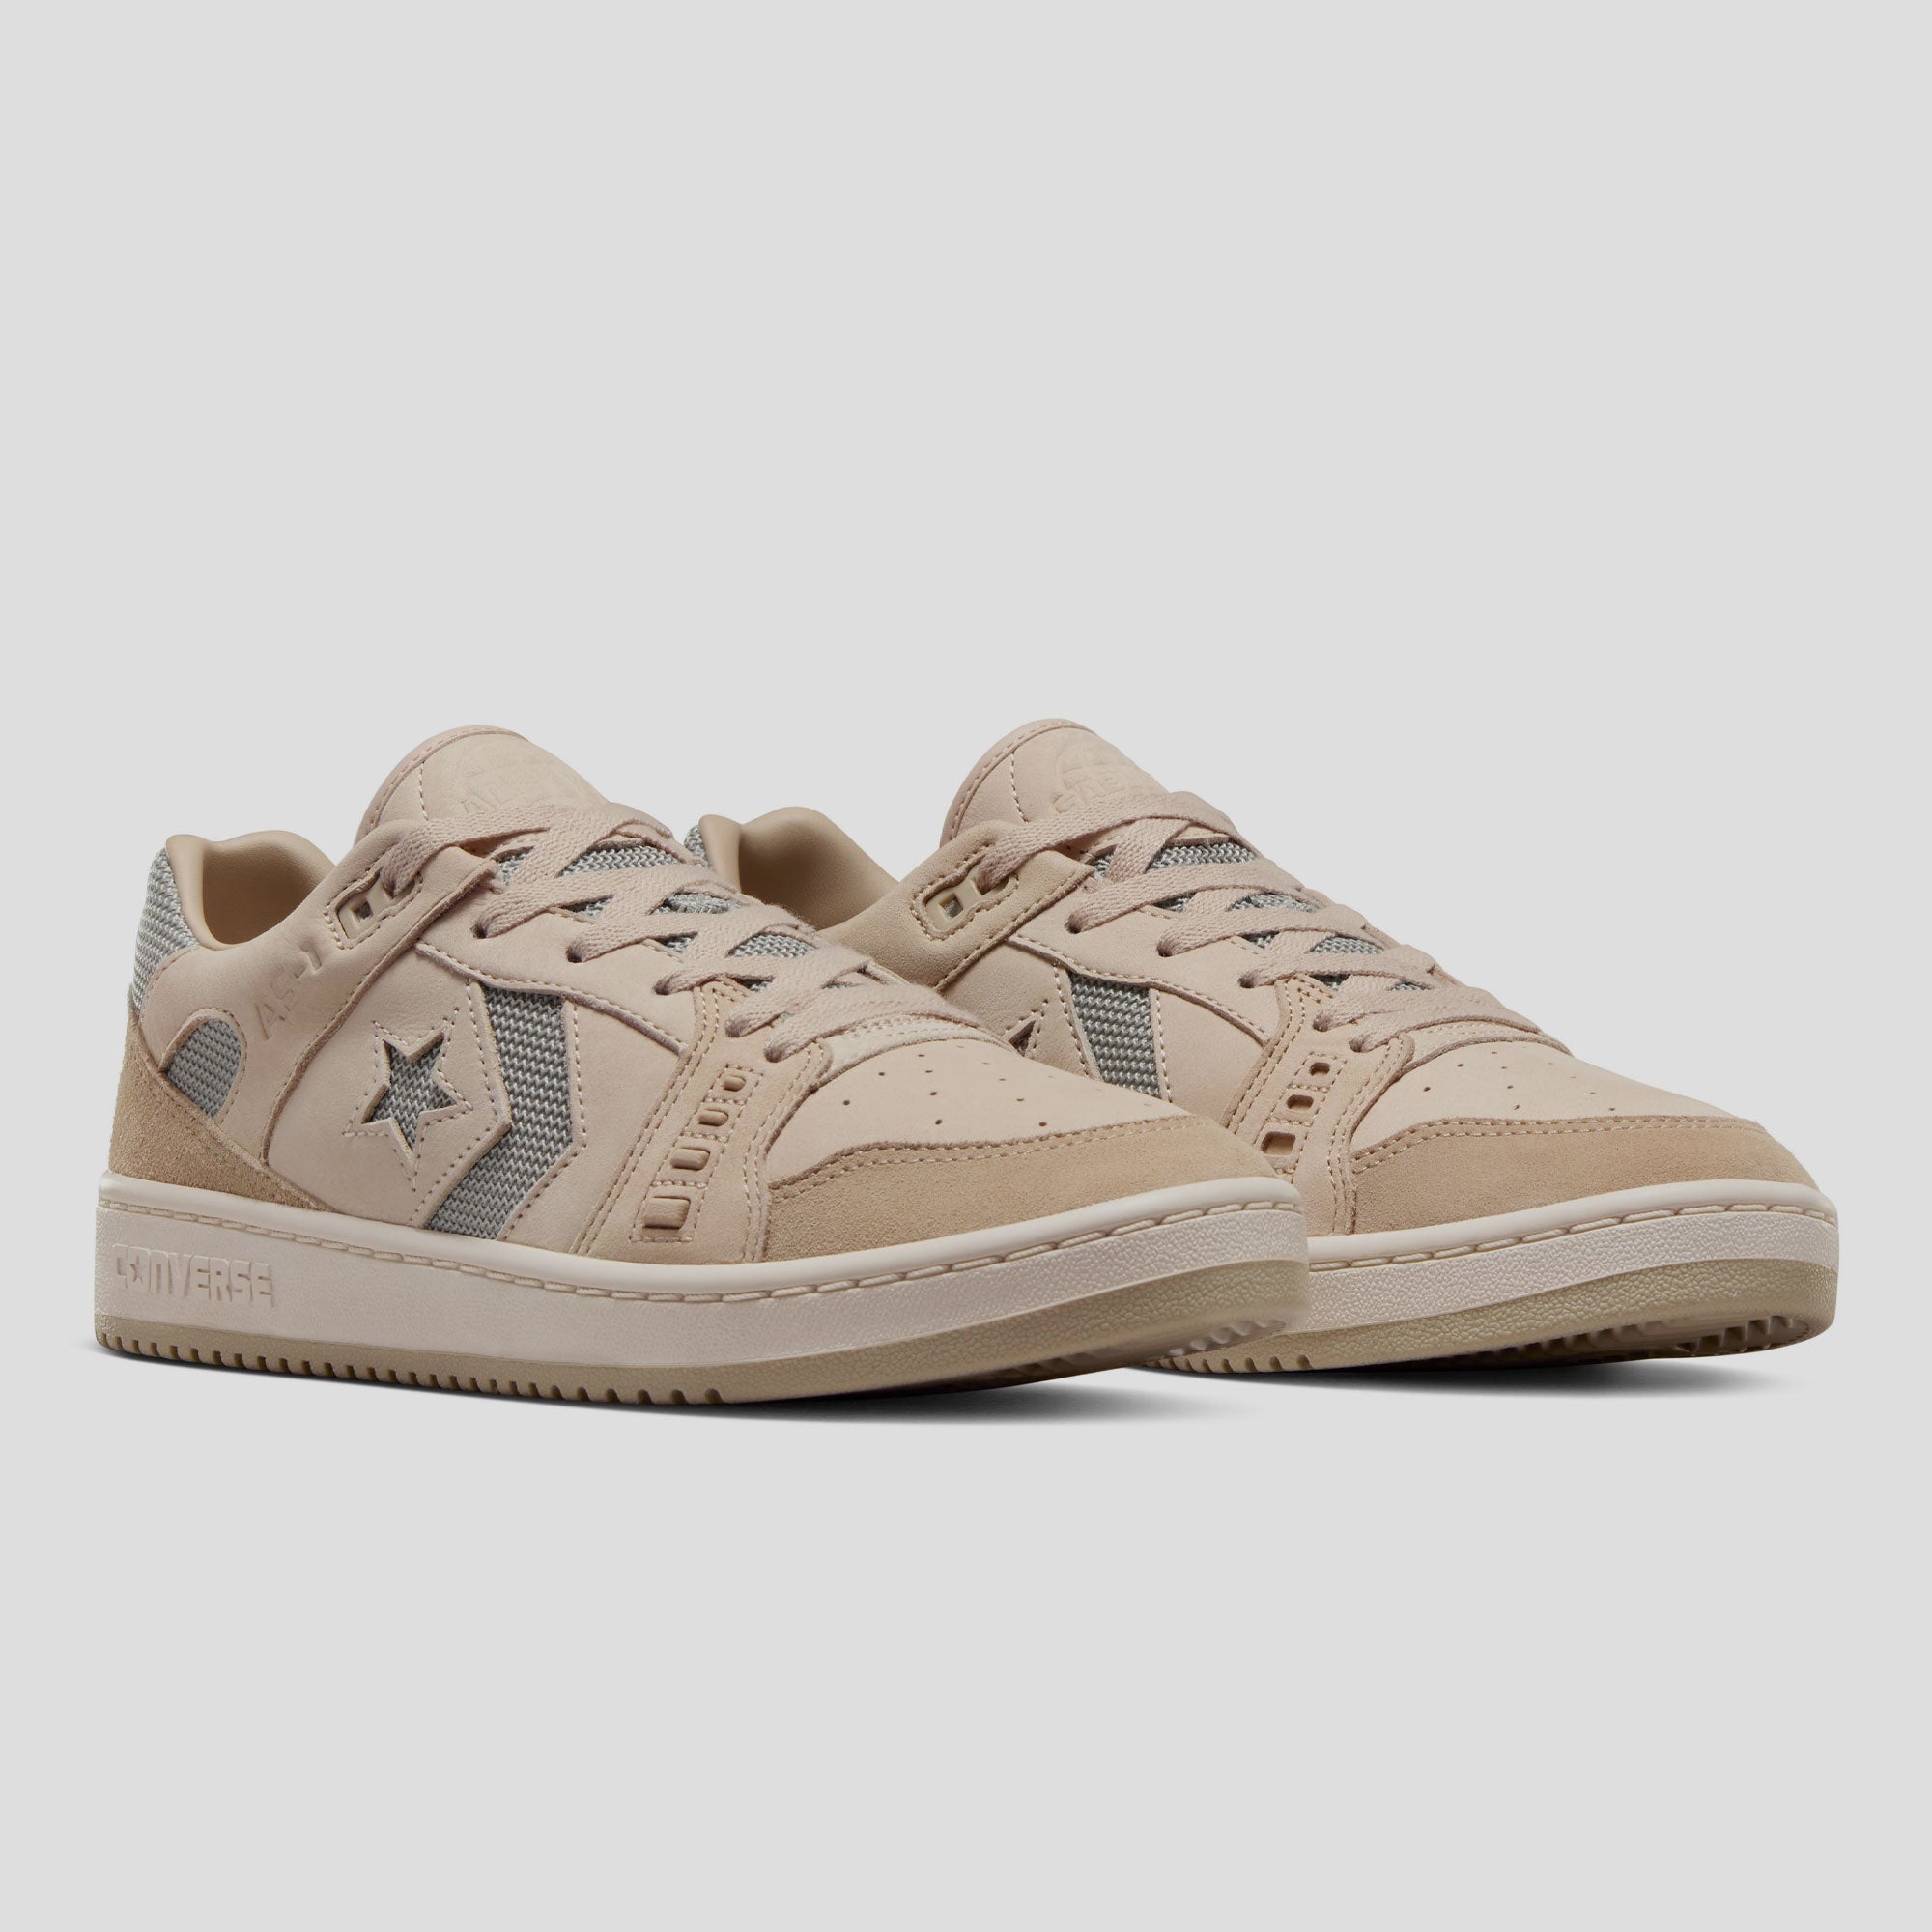 Converse Cons AS-1 Pro Low Top - Shifting Sand / Warm Sand